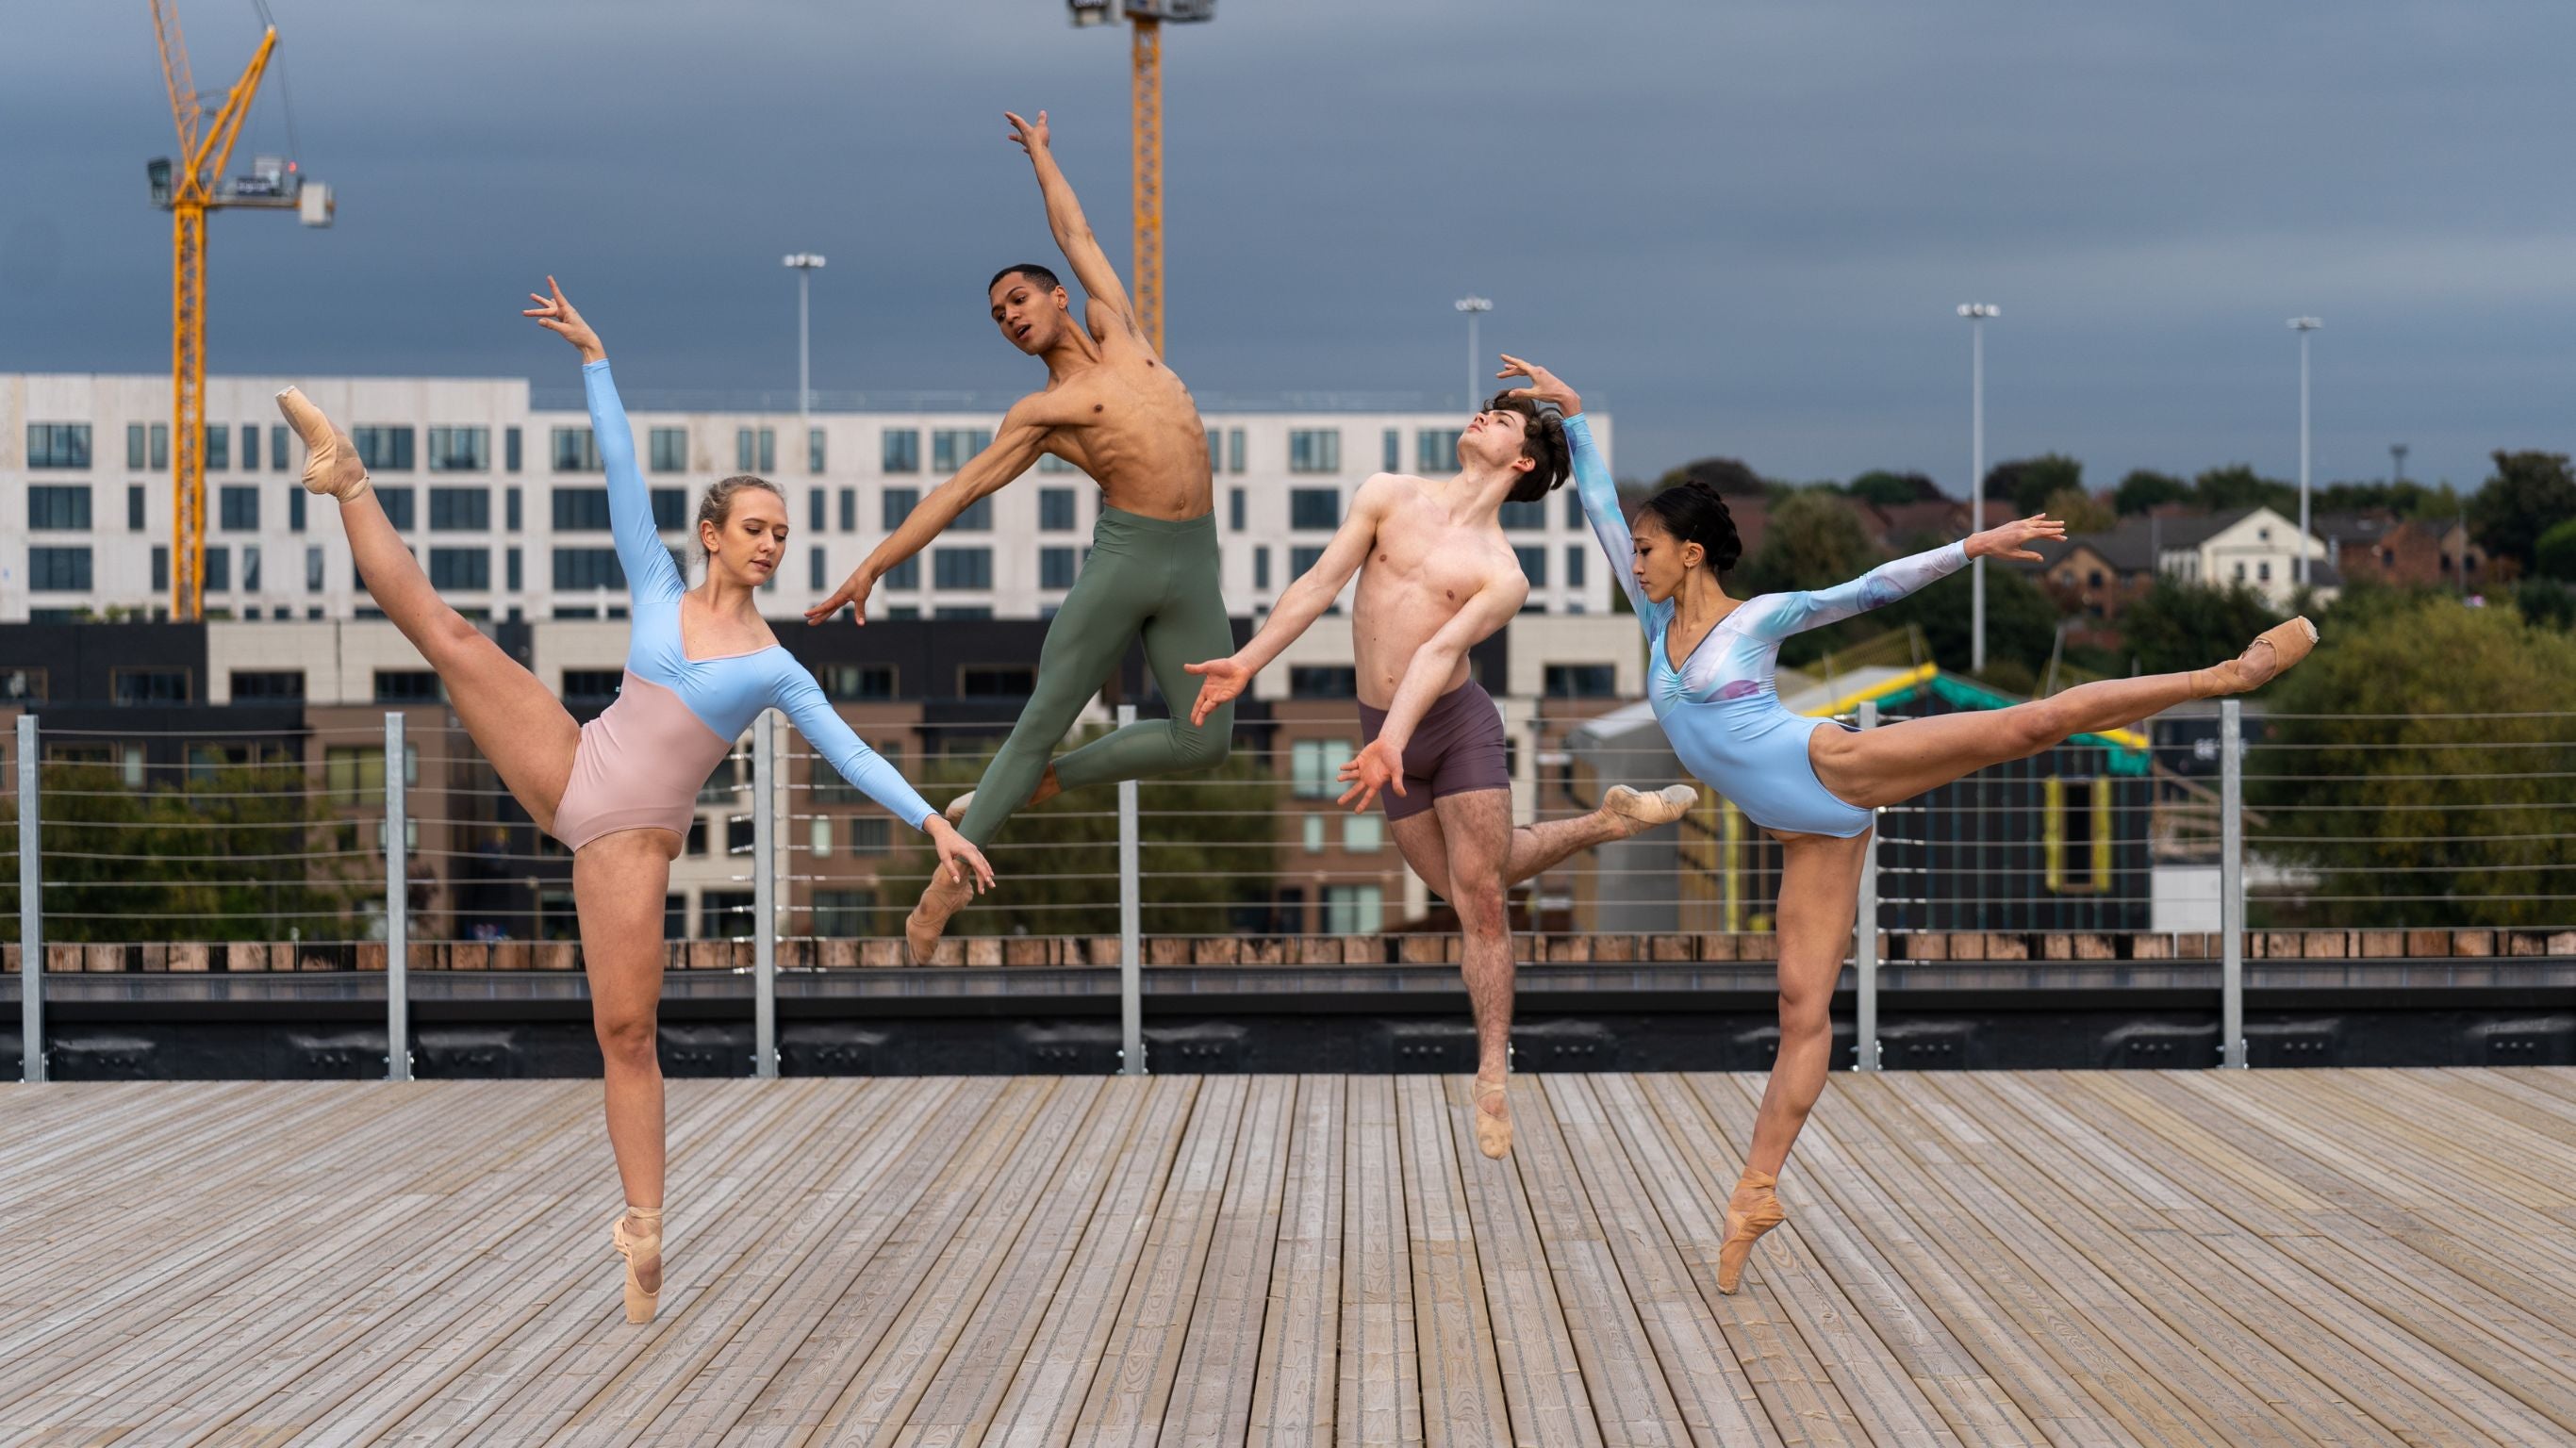 ballet dancers from Northern ballet dressed in imperfect pointes sustainable dancewear 